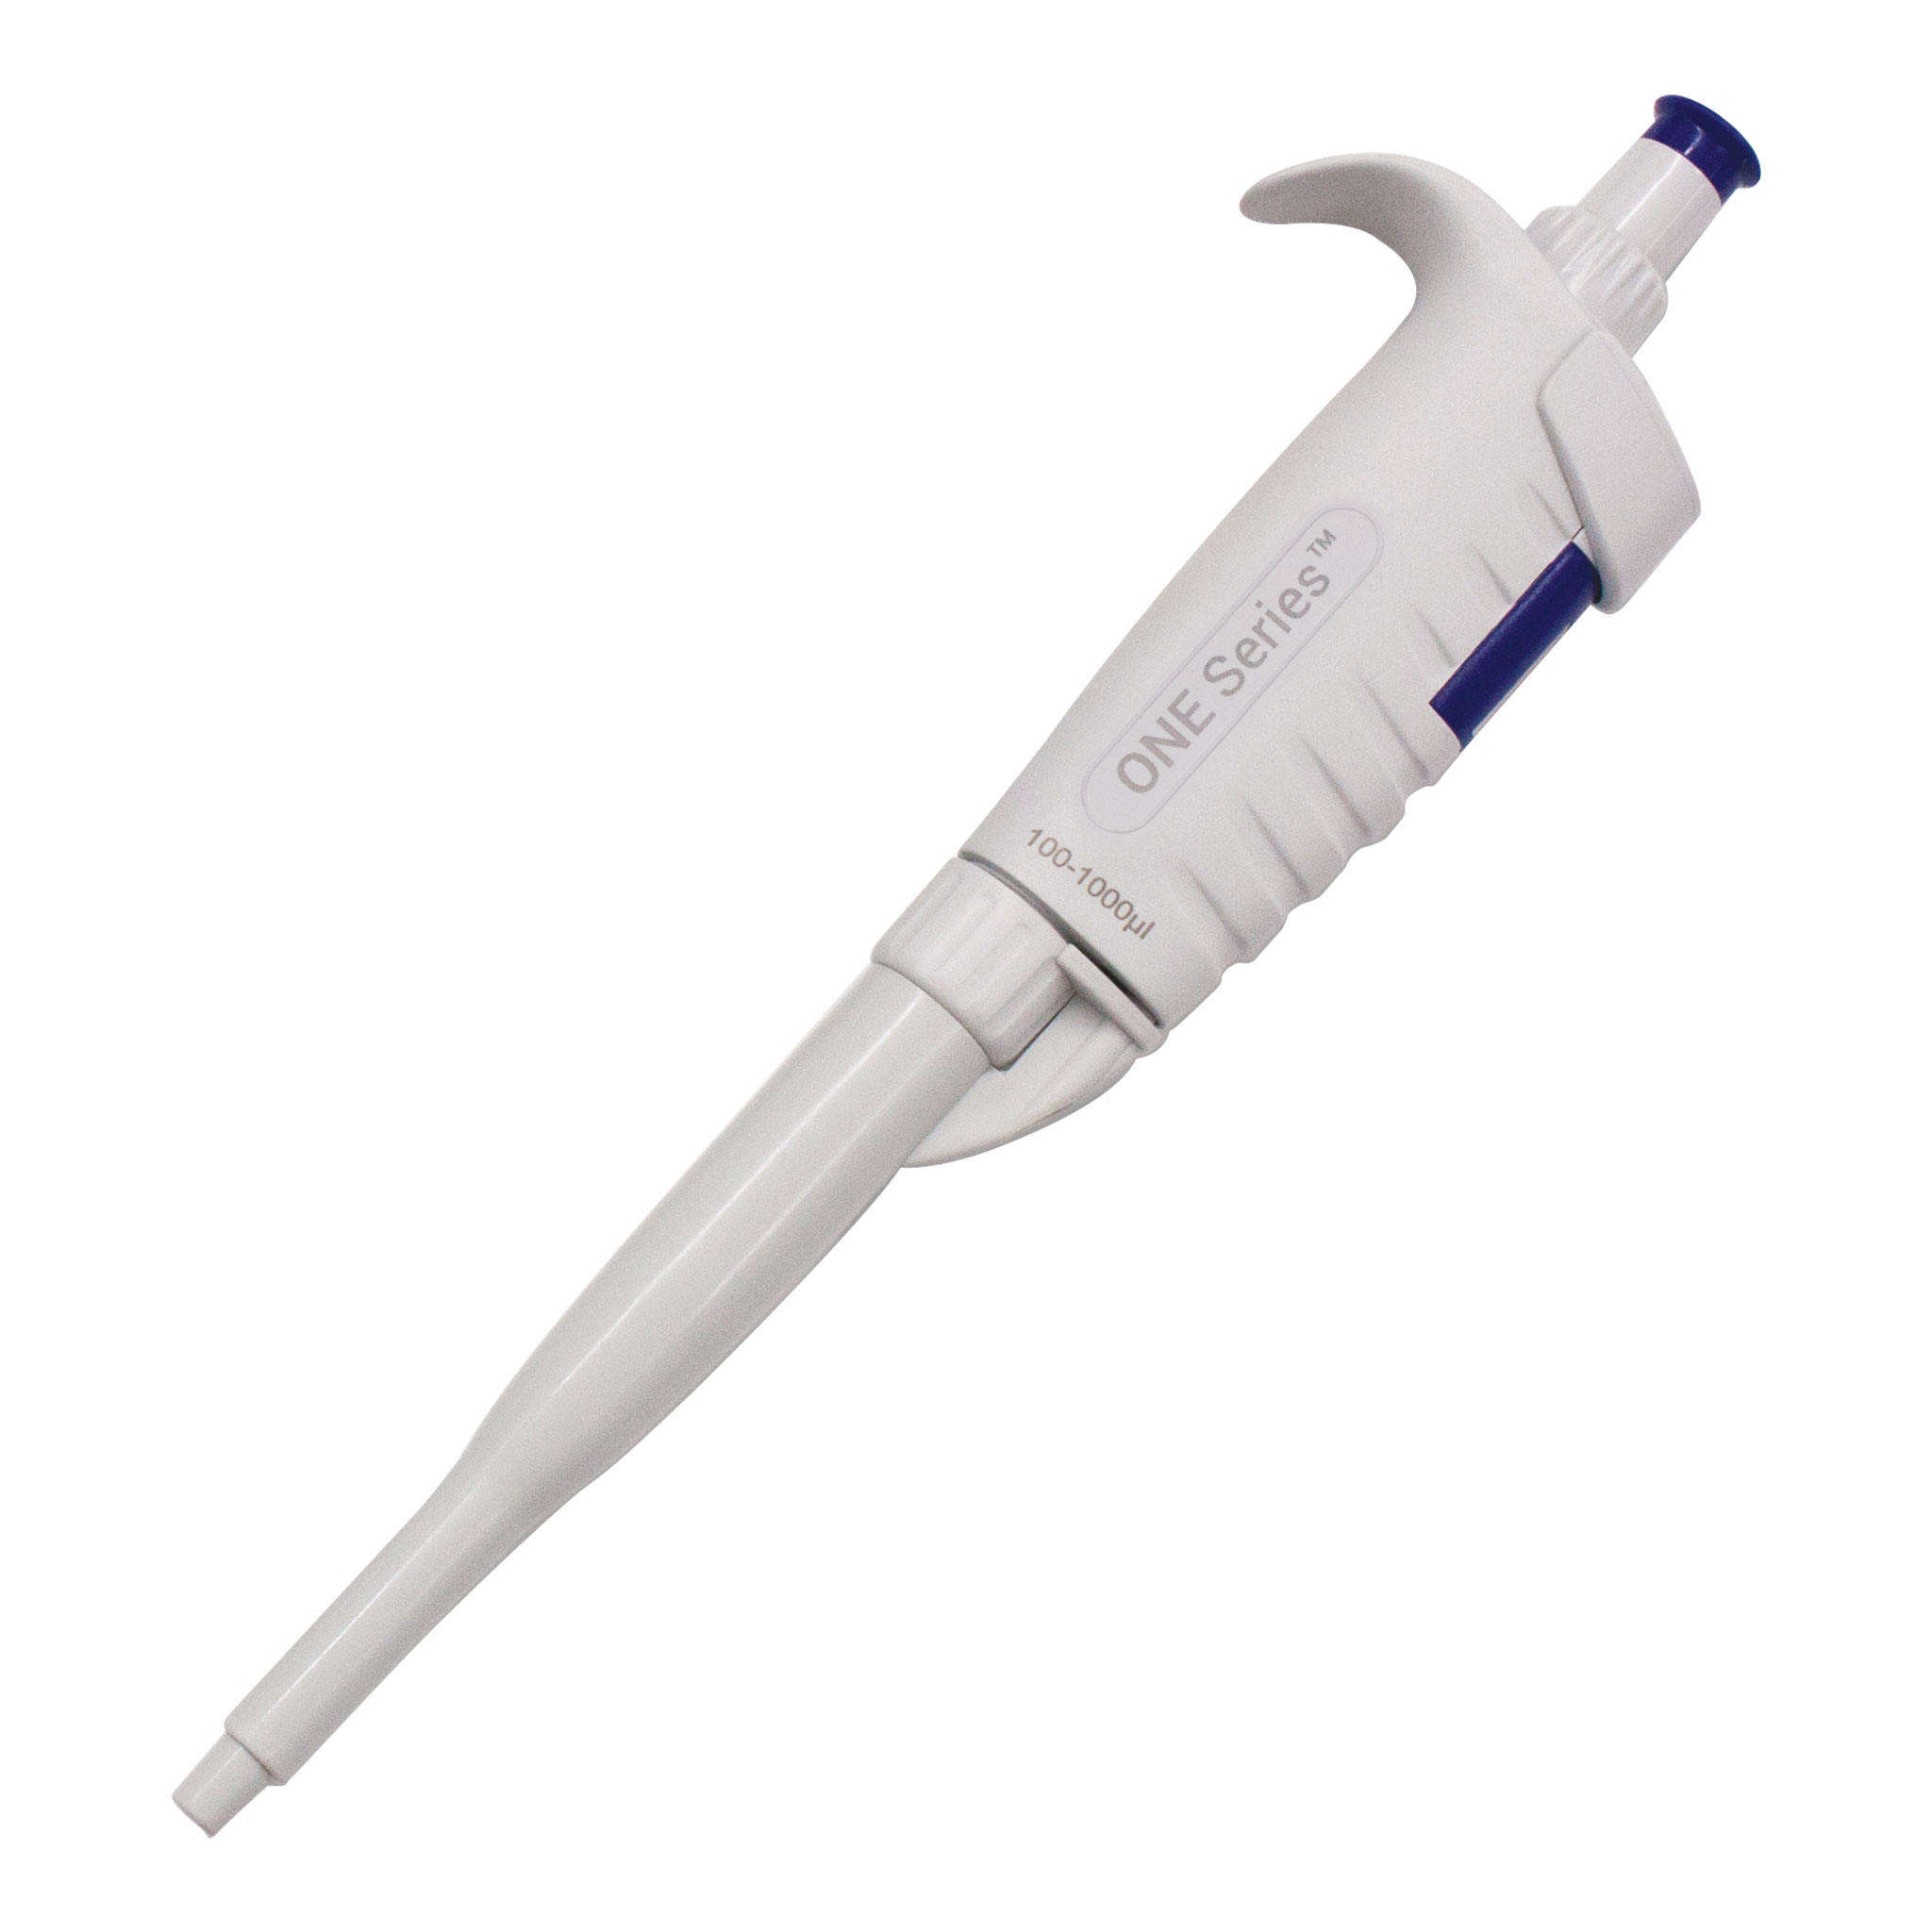 free for mac download Pipette 23.6.13